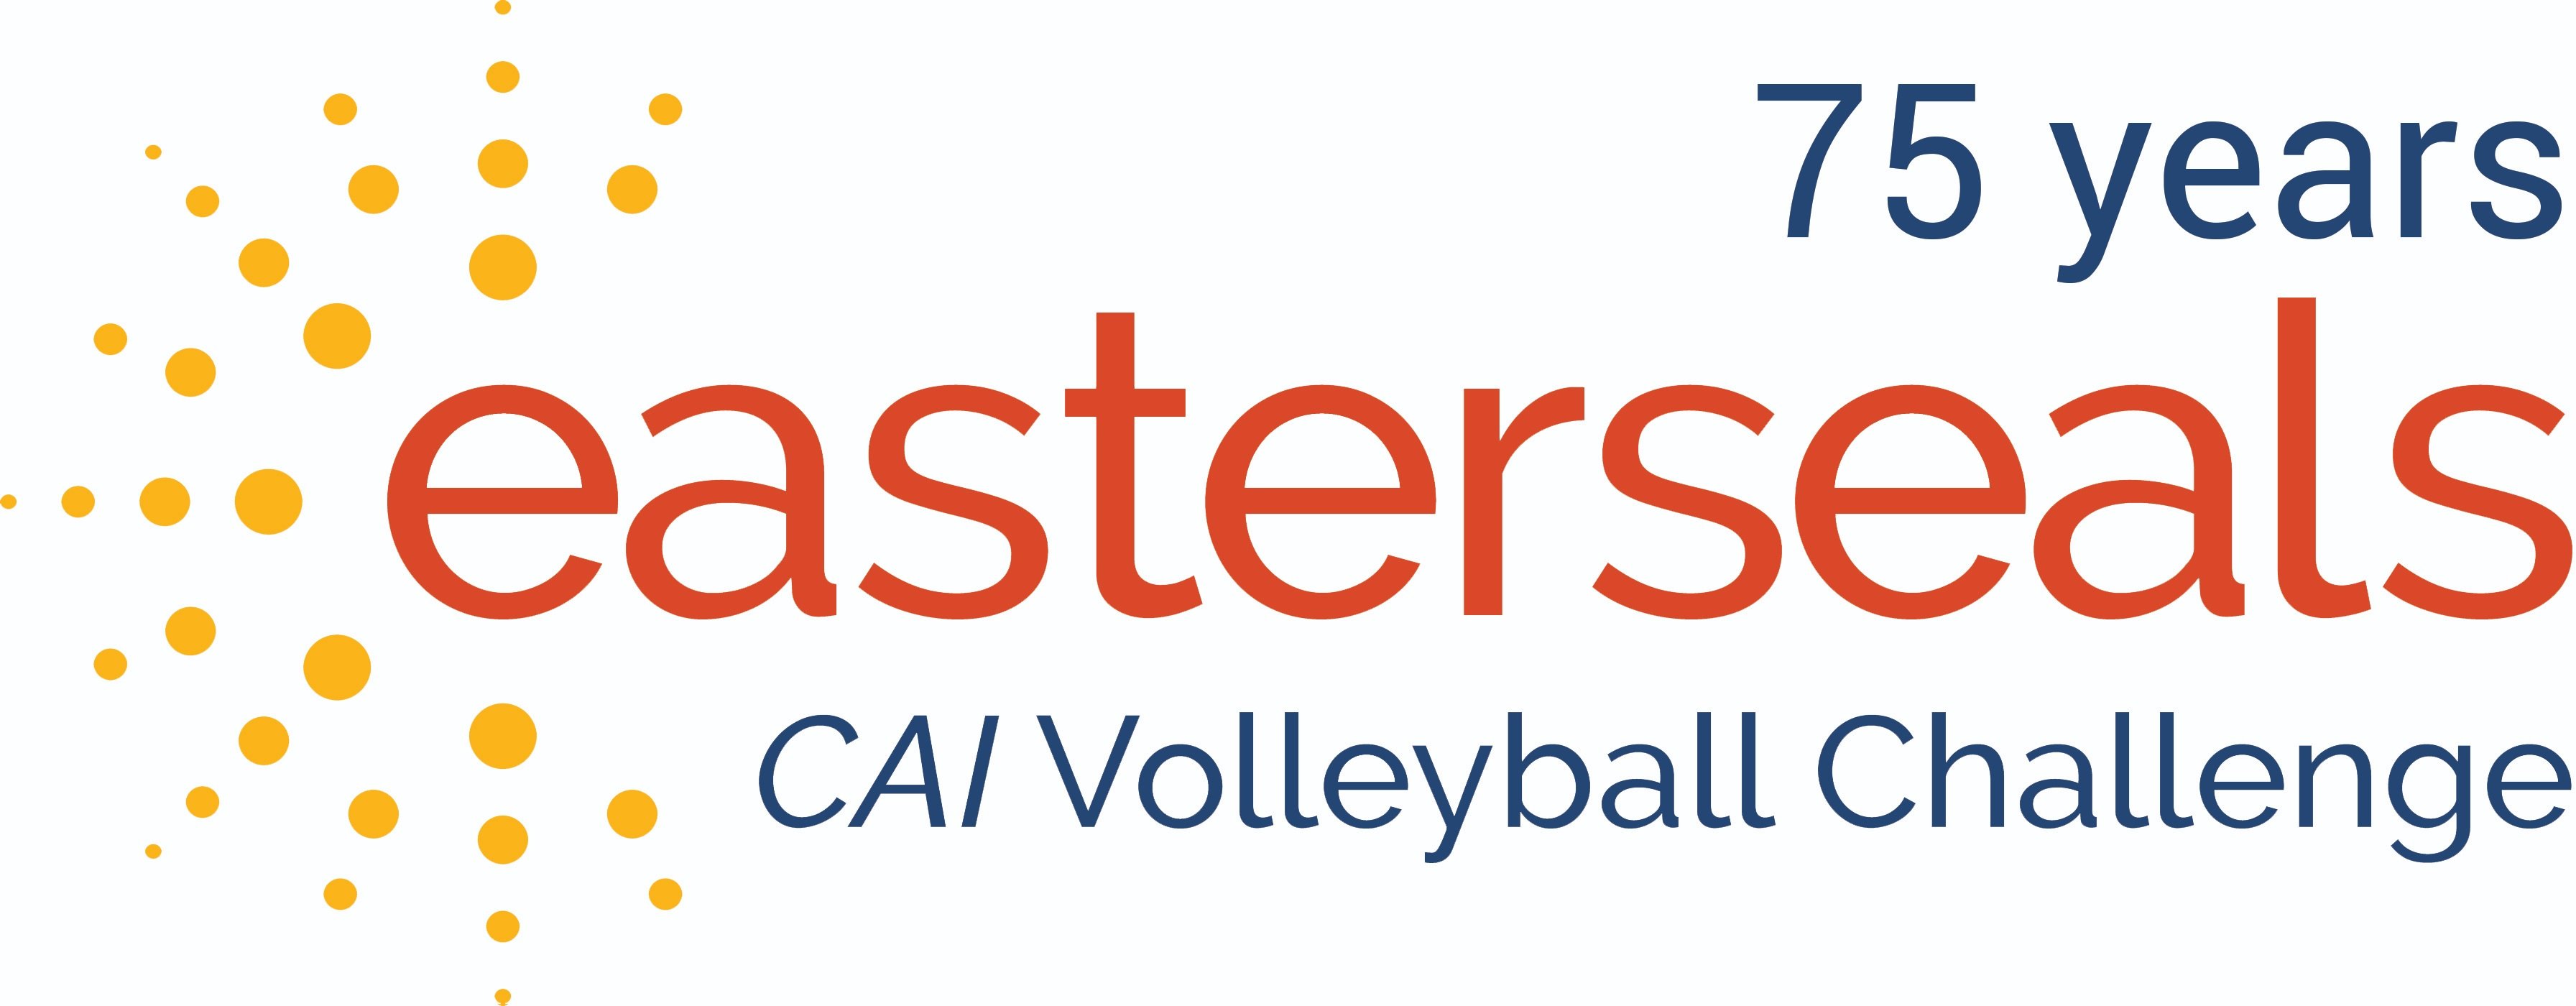 17-enigmatic-facts-about-easter-seals-volleyball-challenge